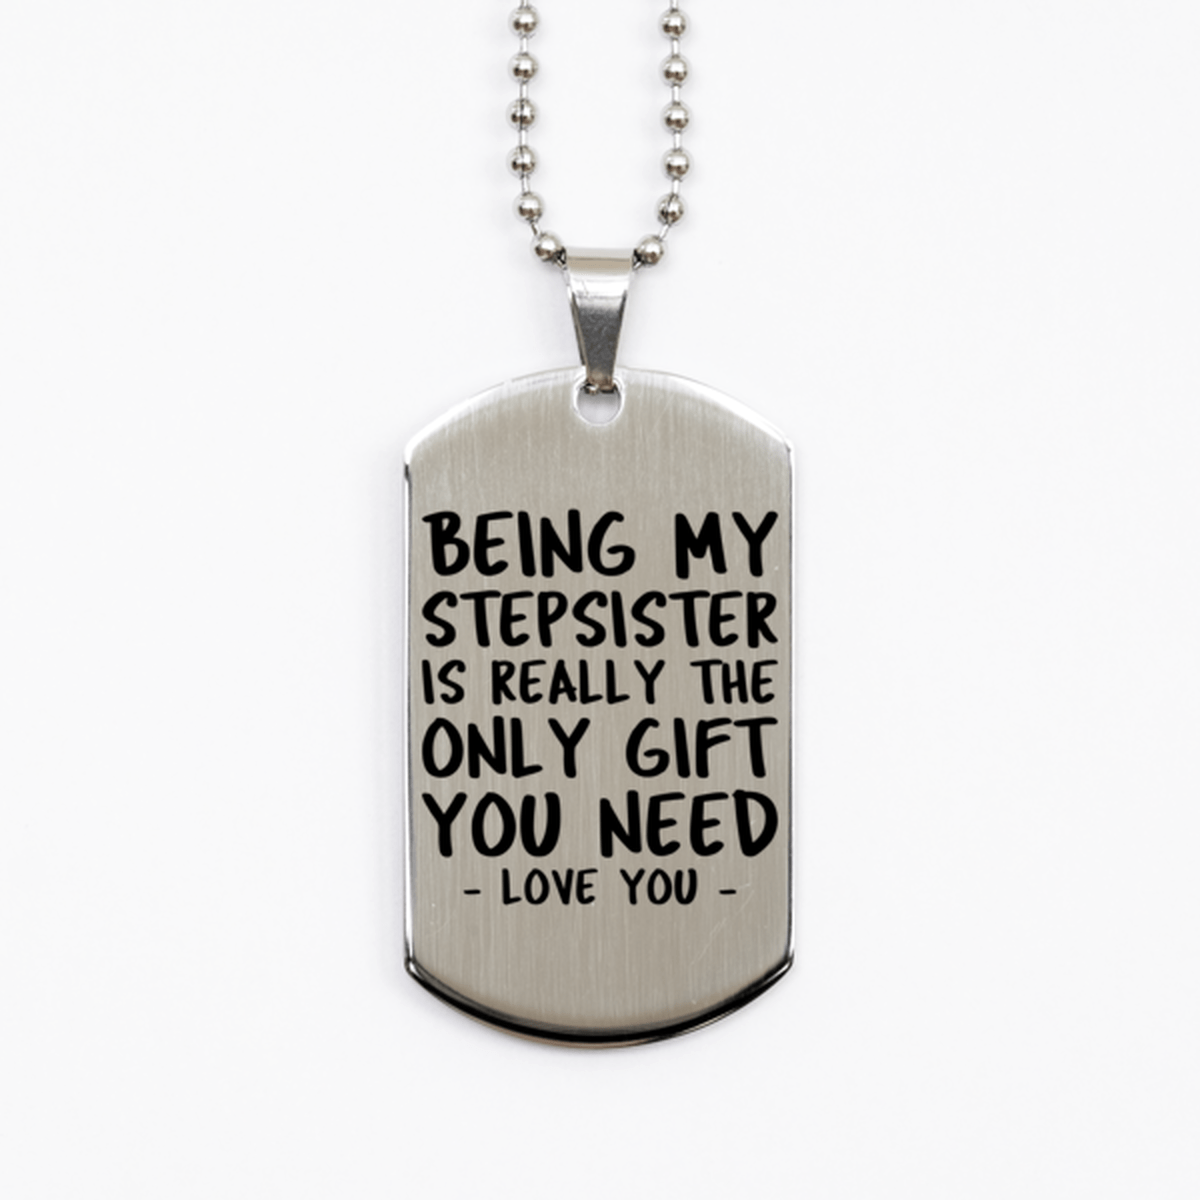 Funny Stepsister Silver Dog Tag Necklace, Being My Stepsister Is Really the Only Gift You Need, Best Birthday Gifts for Stepsister